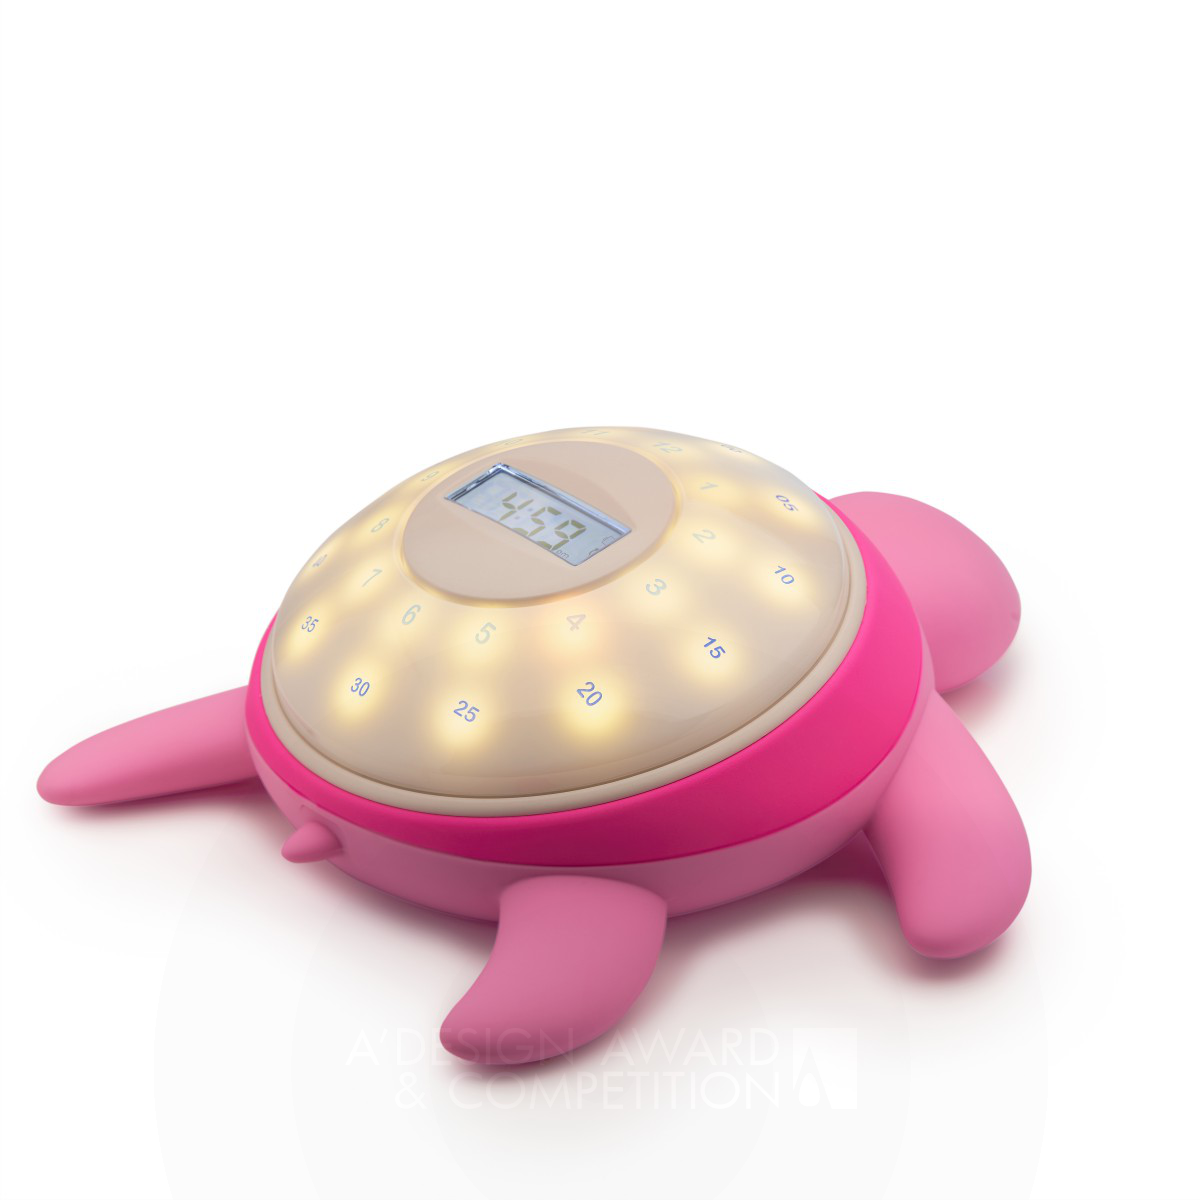 Daniel Lau wins Iron at the prestigious A' Baby, Kids and Children's Products Design Award with Tick Tock Turtle Kids Alarm Clock.